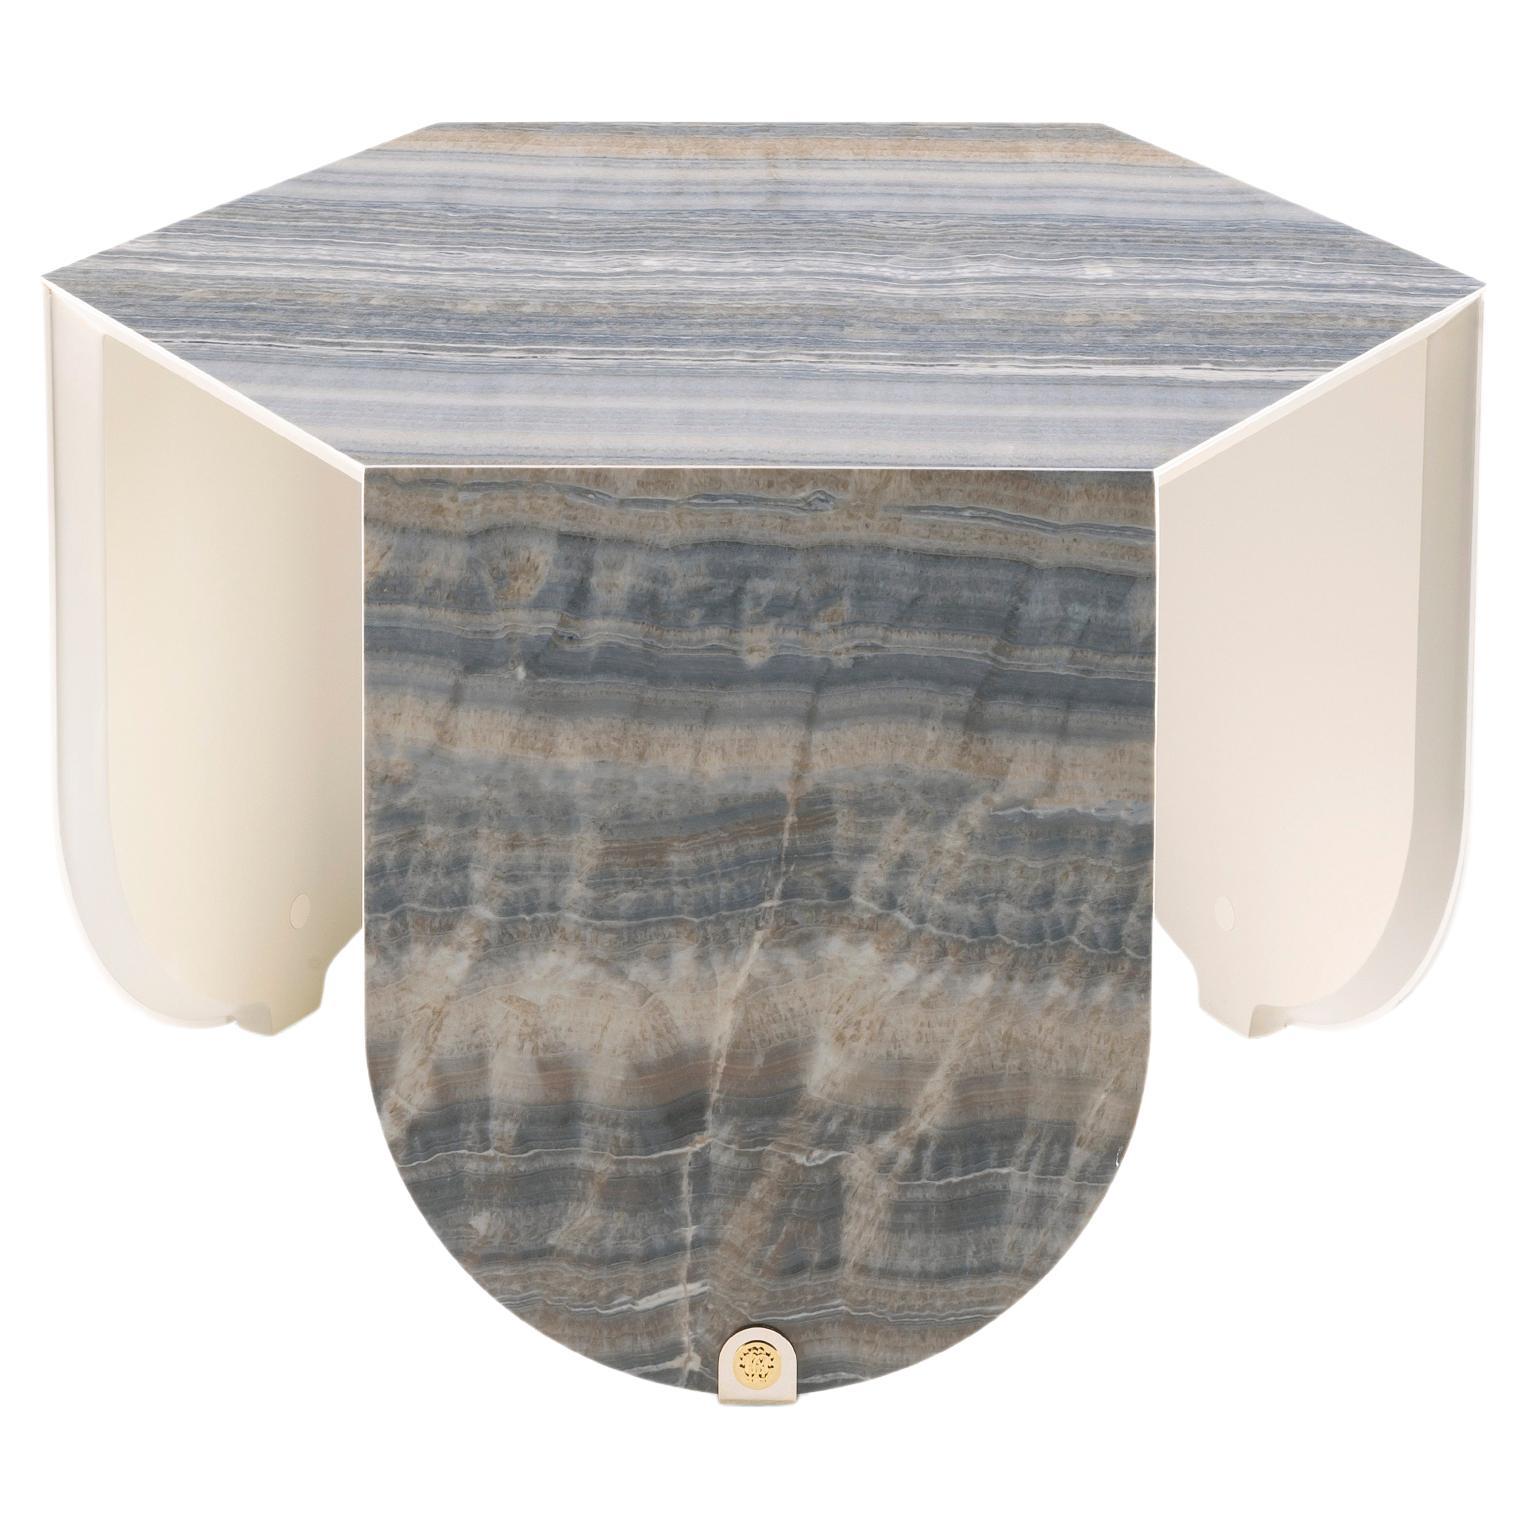 21st Century Inagua Side Table in Grey Gres by Roberto Cavalli Home Interiors For Sale